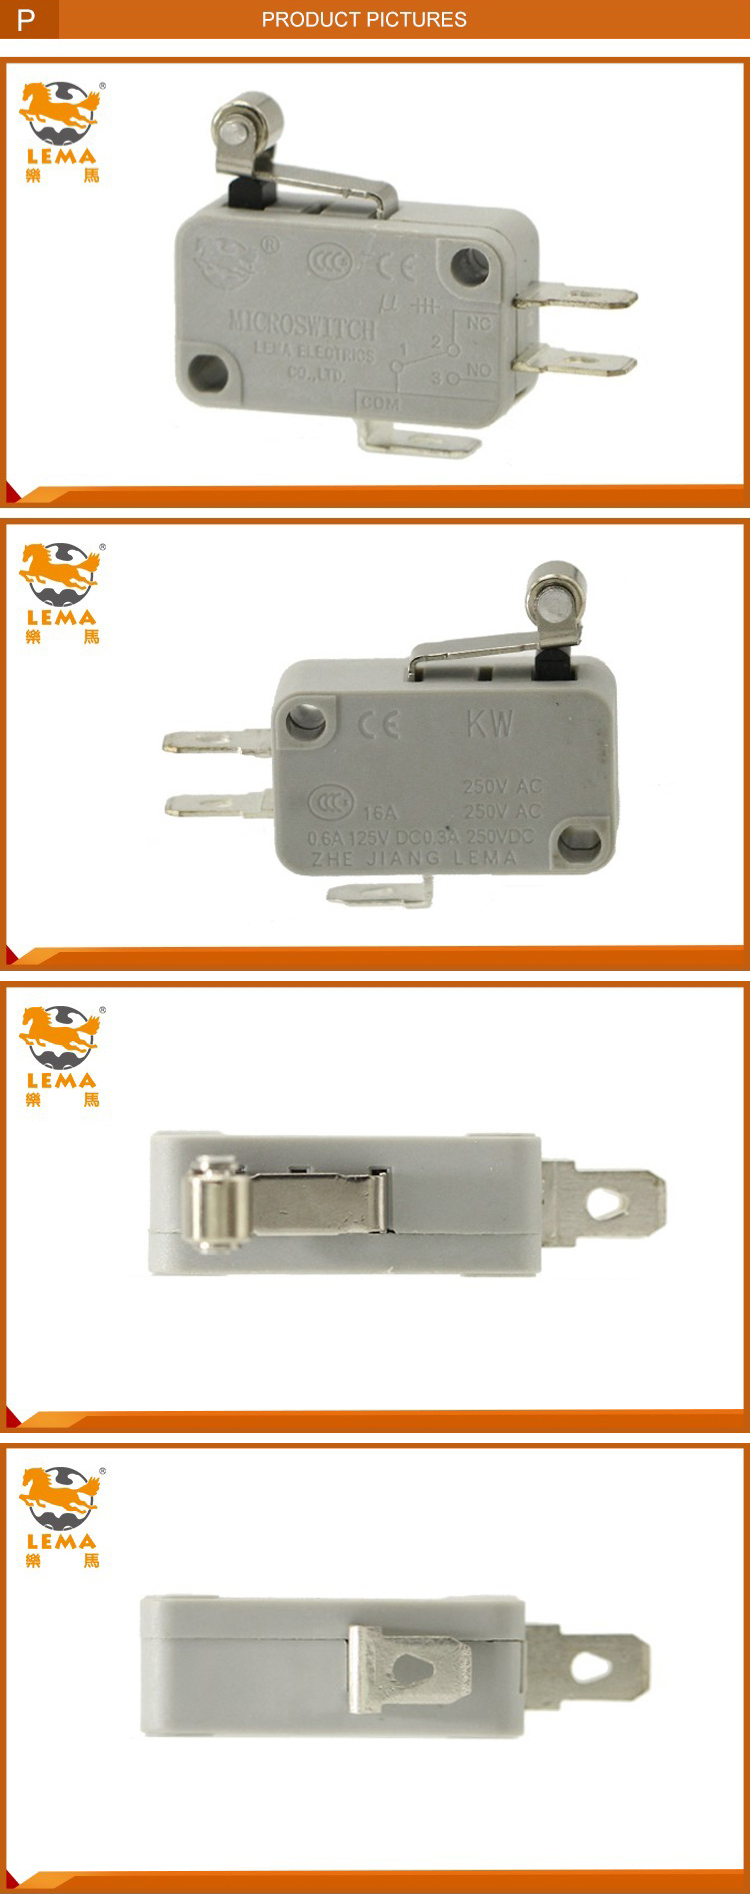 Lema Kw7-3 Grey Roller Lever Actuator Magnetic Micro Switch Micro Basic Switch